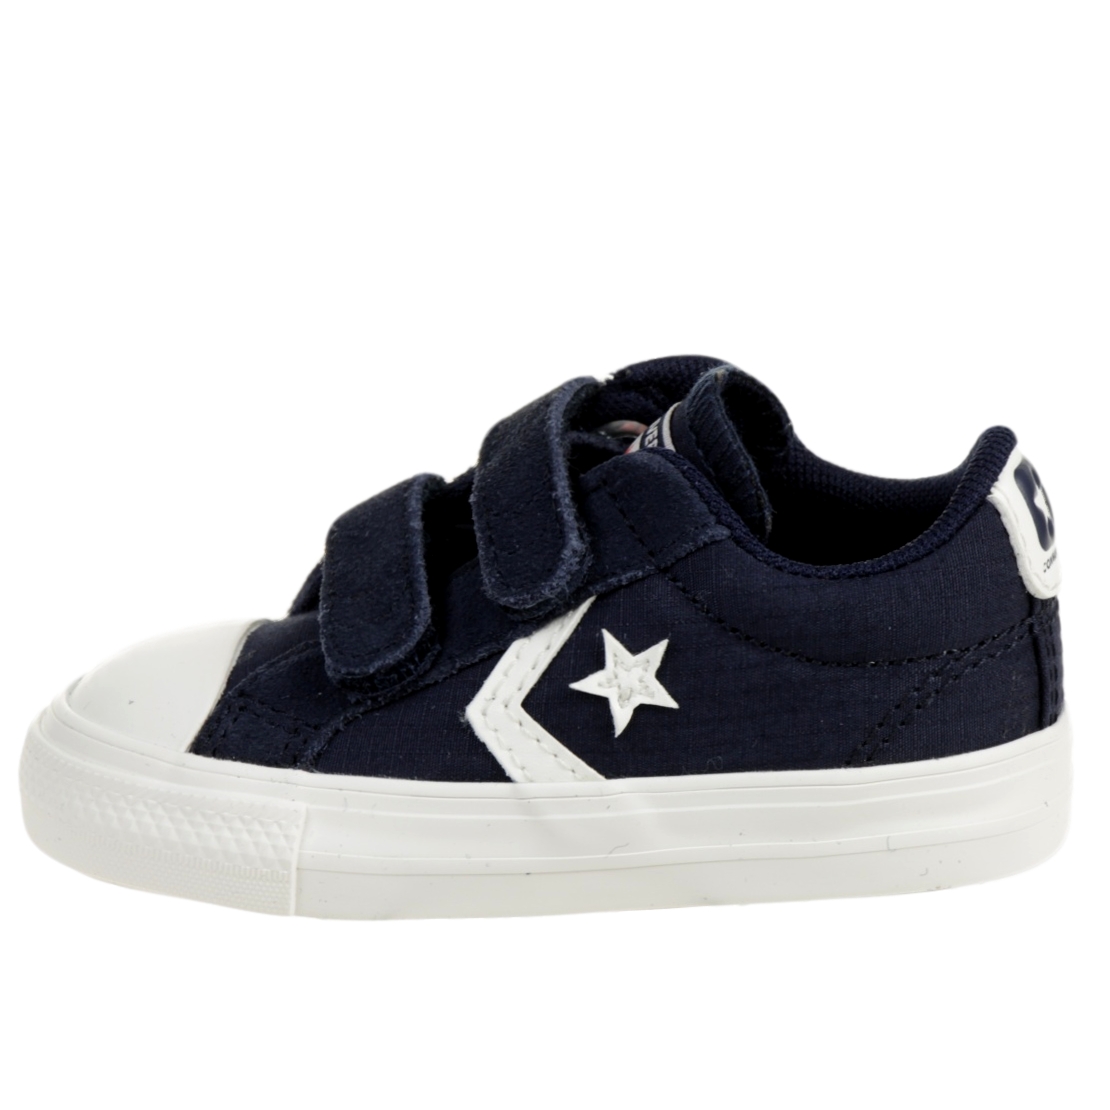 Converse CTAS 2V OX Ripstop Easy-On Star Player Low Top Kinder Sneaker 767550C Blau